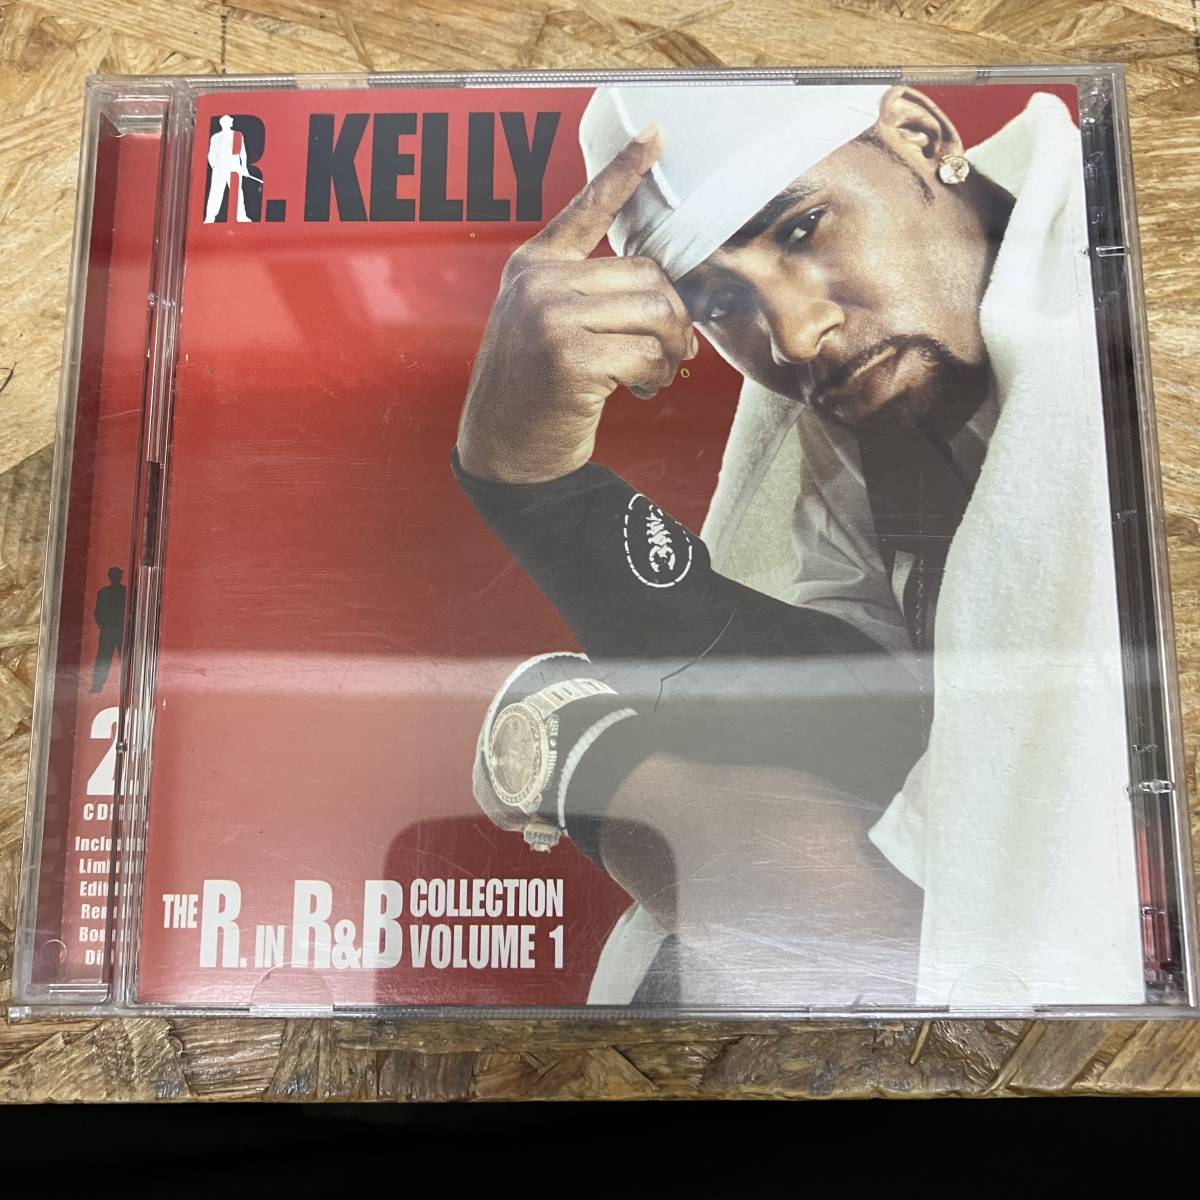 ● HIPHOP,R&B R. KELLY - THE R. IN R&B COLLECTION VOLUME 1 アルバム,名作! CD 中古品_画像1